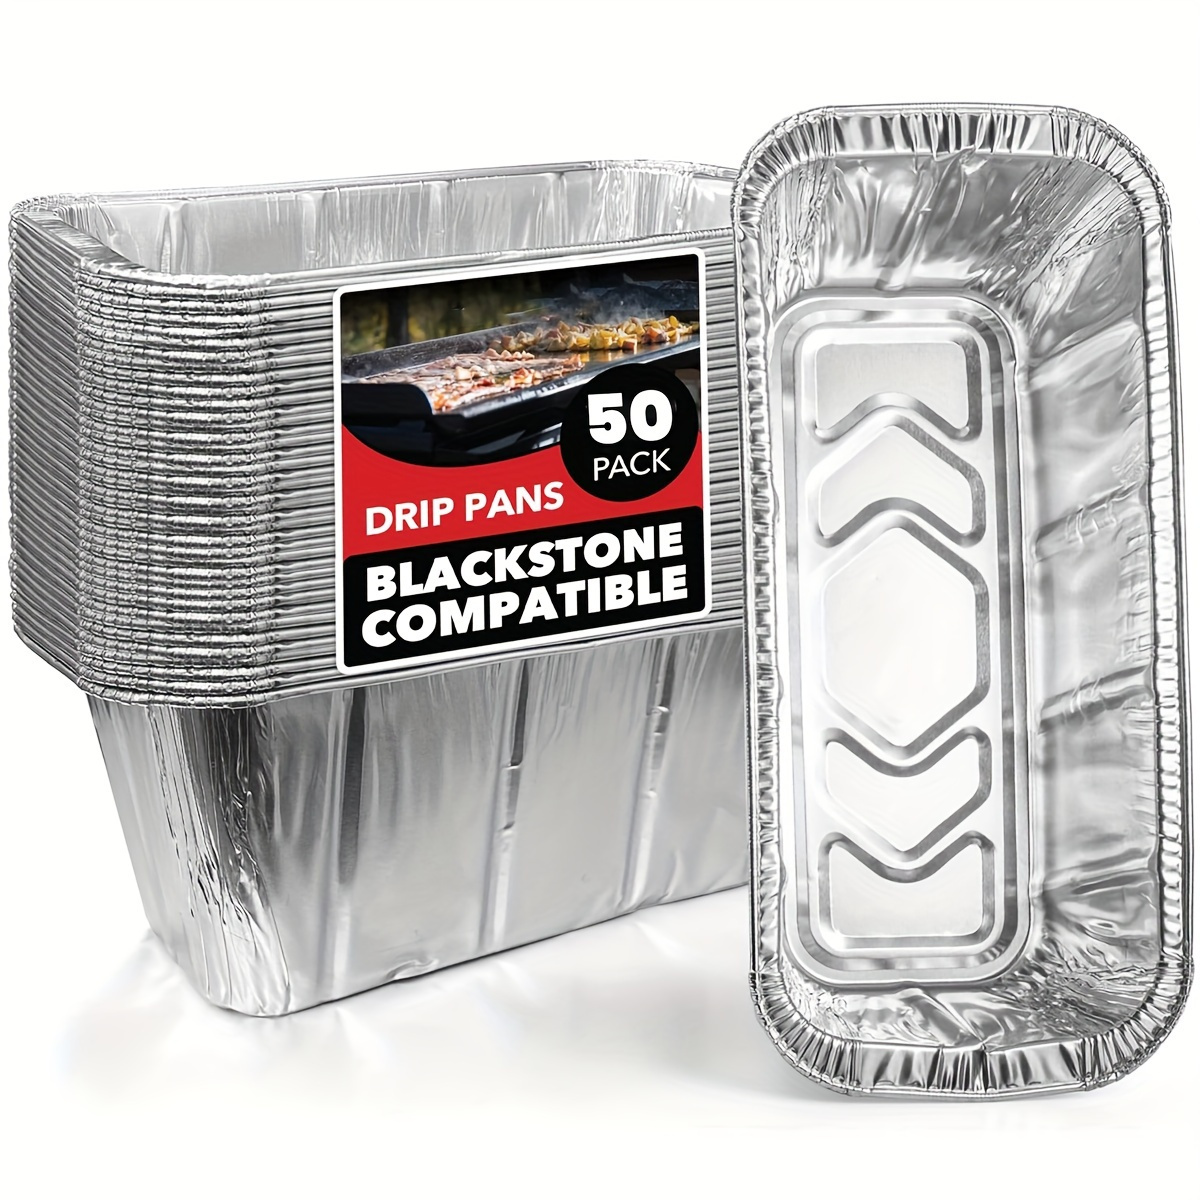 

25/50 Piece Leak-proof Aluminum Foil Liners For Blackstone Griddle - Easy Clean Disposable Grease Cups, Fits 17", 22", 28", 36" Models